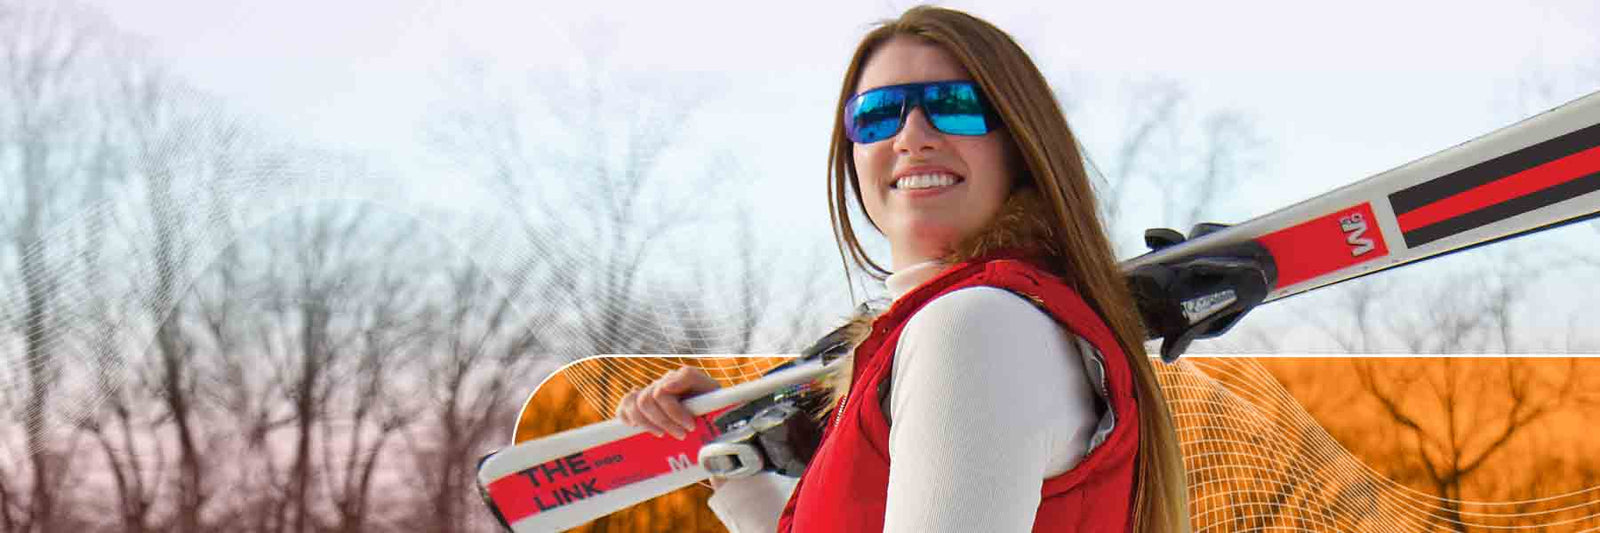 Popticals ski sunglasses enable you to better see the mountain’s contours, snow coverage and ideal lines as never before.